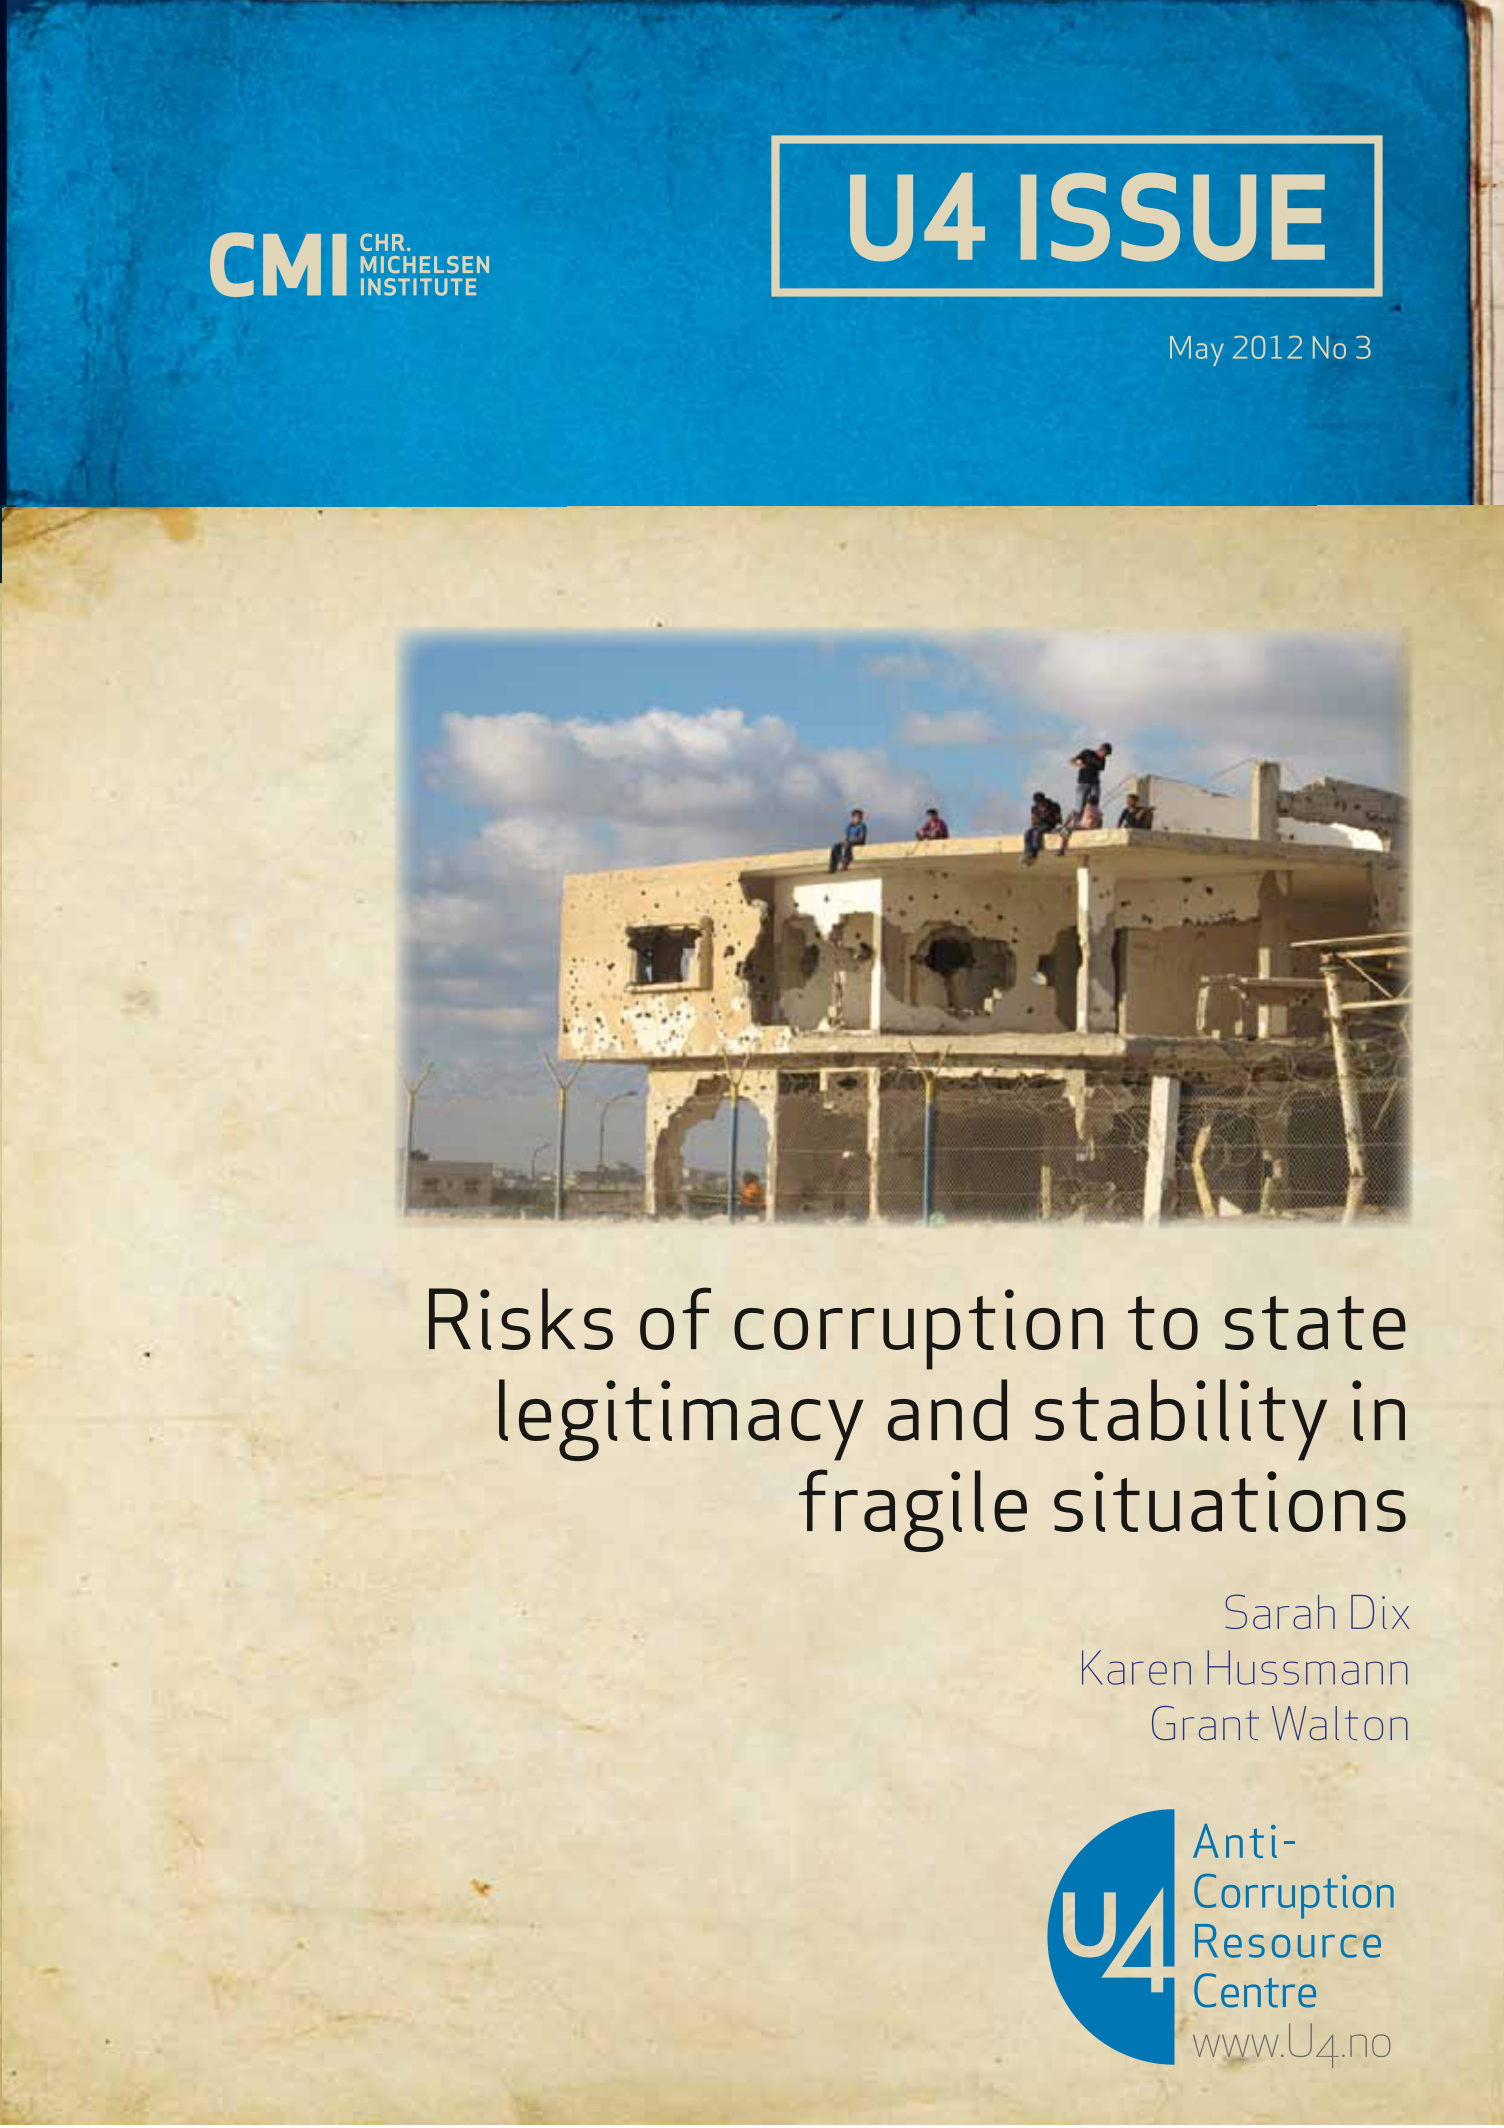 Risks of corruption to state legitimacy and stability in fragile situations